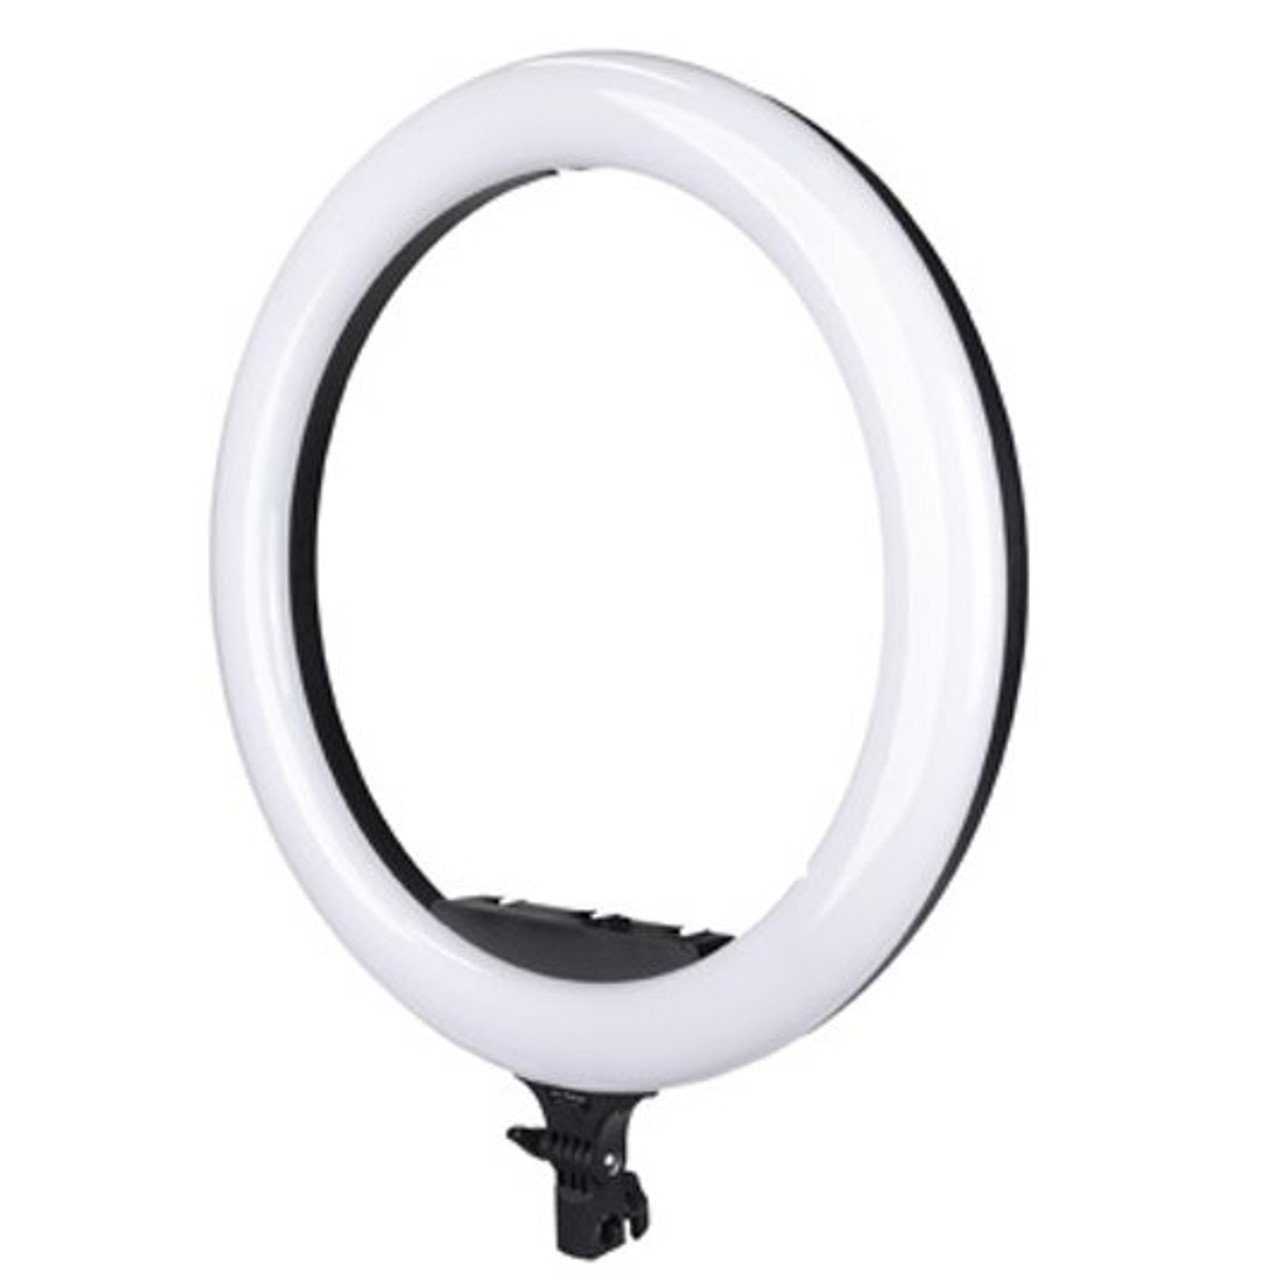 Midwest Photo Smith-Victor Orbit Pro Series LED Ring Light